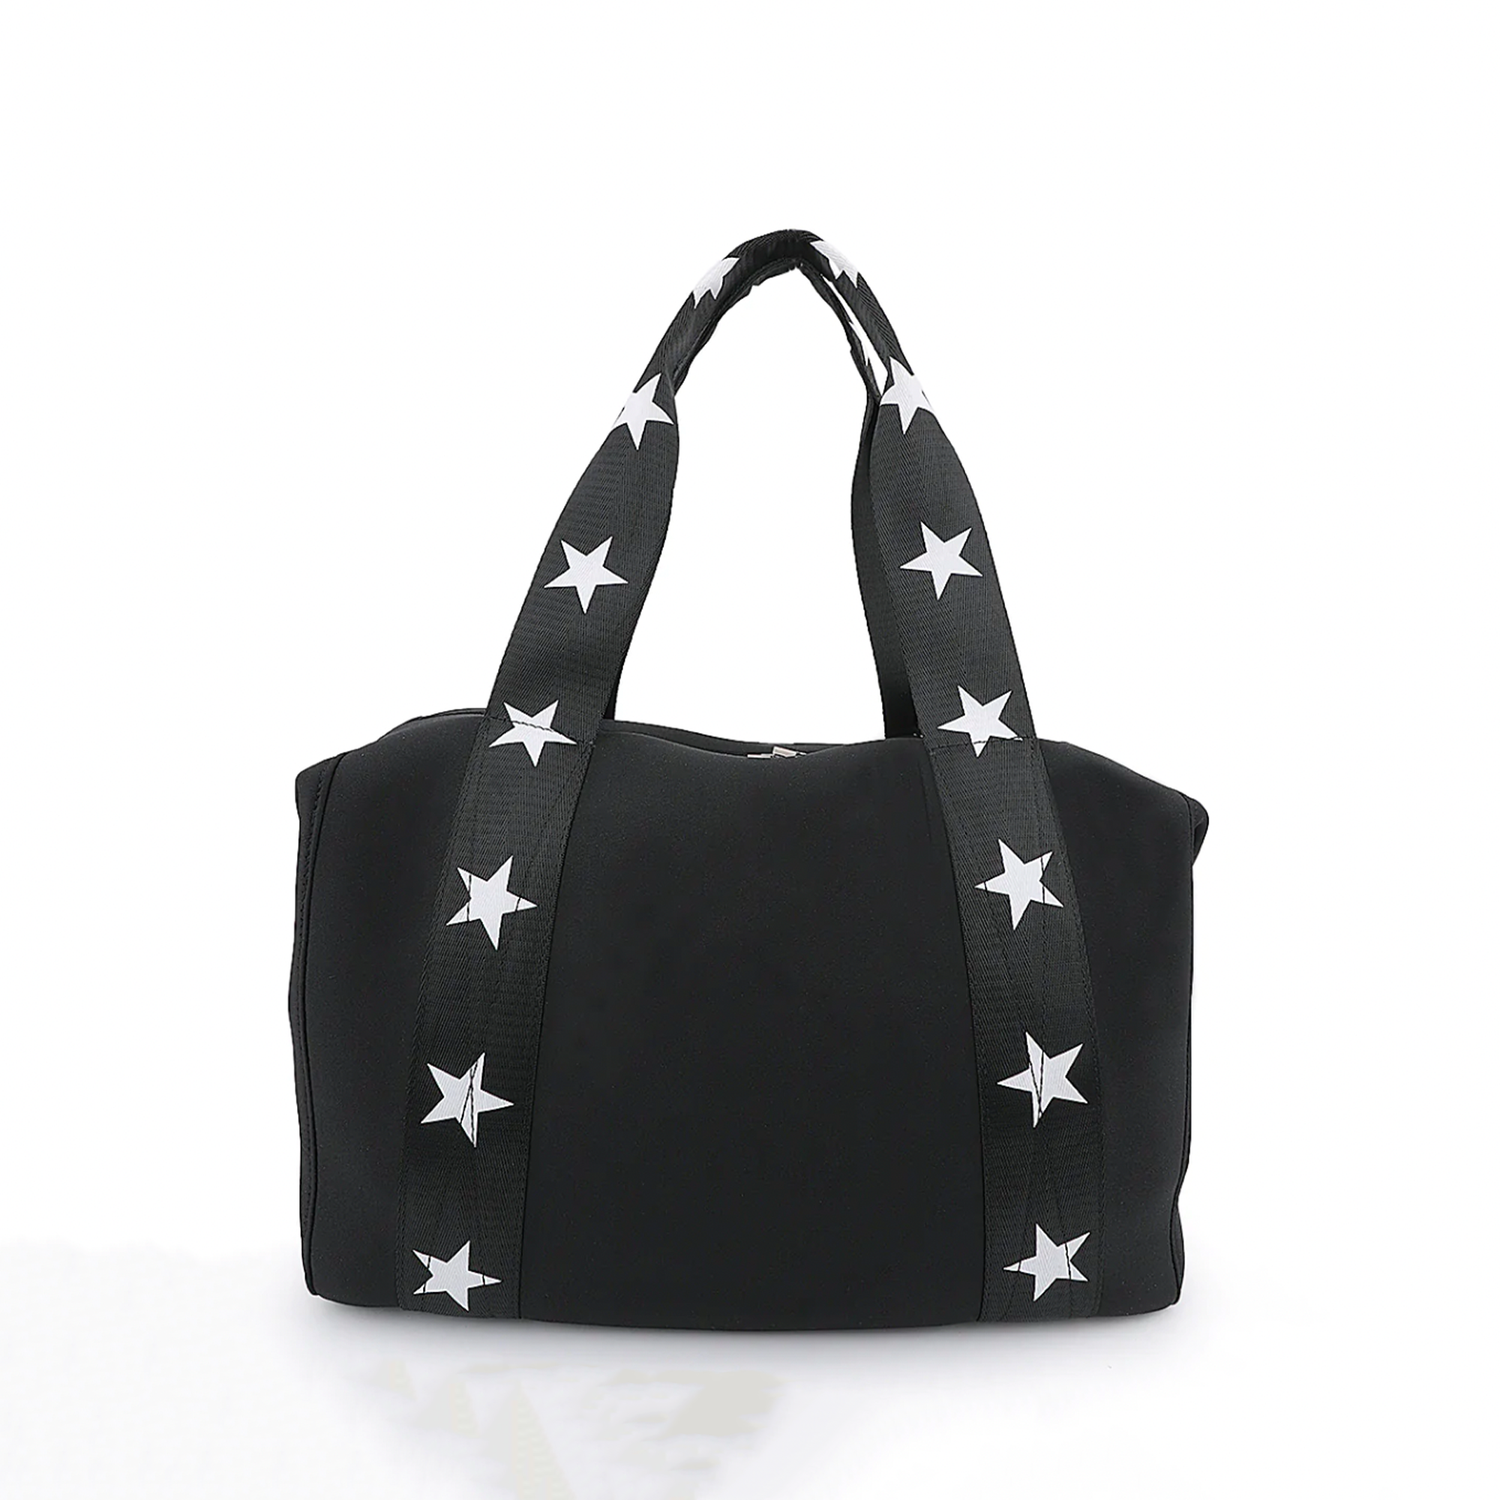 Vintage Havana Black Stars Tote. Perfect for everyday use, the Vintage Havana Star Tote is a spacious handbag for women with a modern, athleisure style with wide straps covered in stars. Use for the gym, an overnight trip, and more!